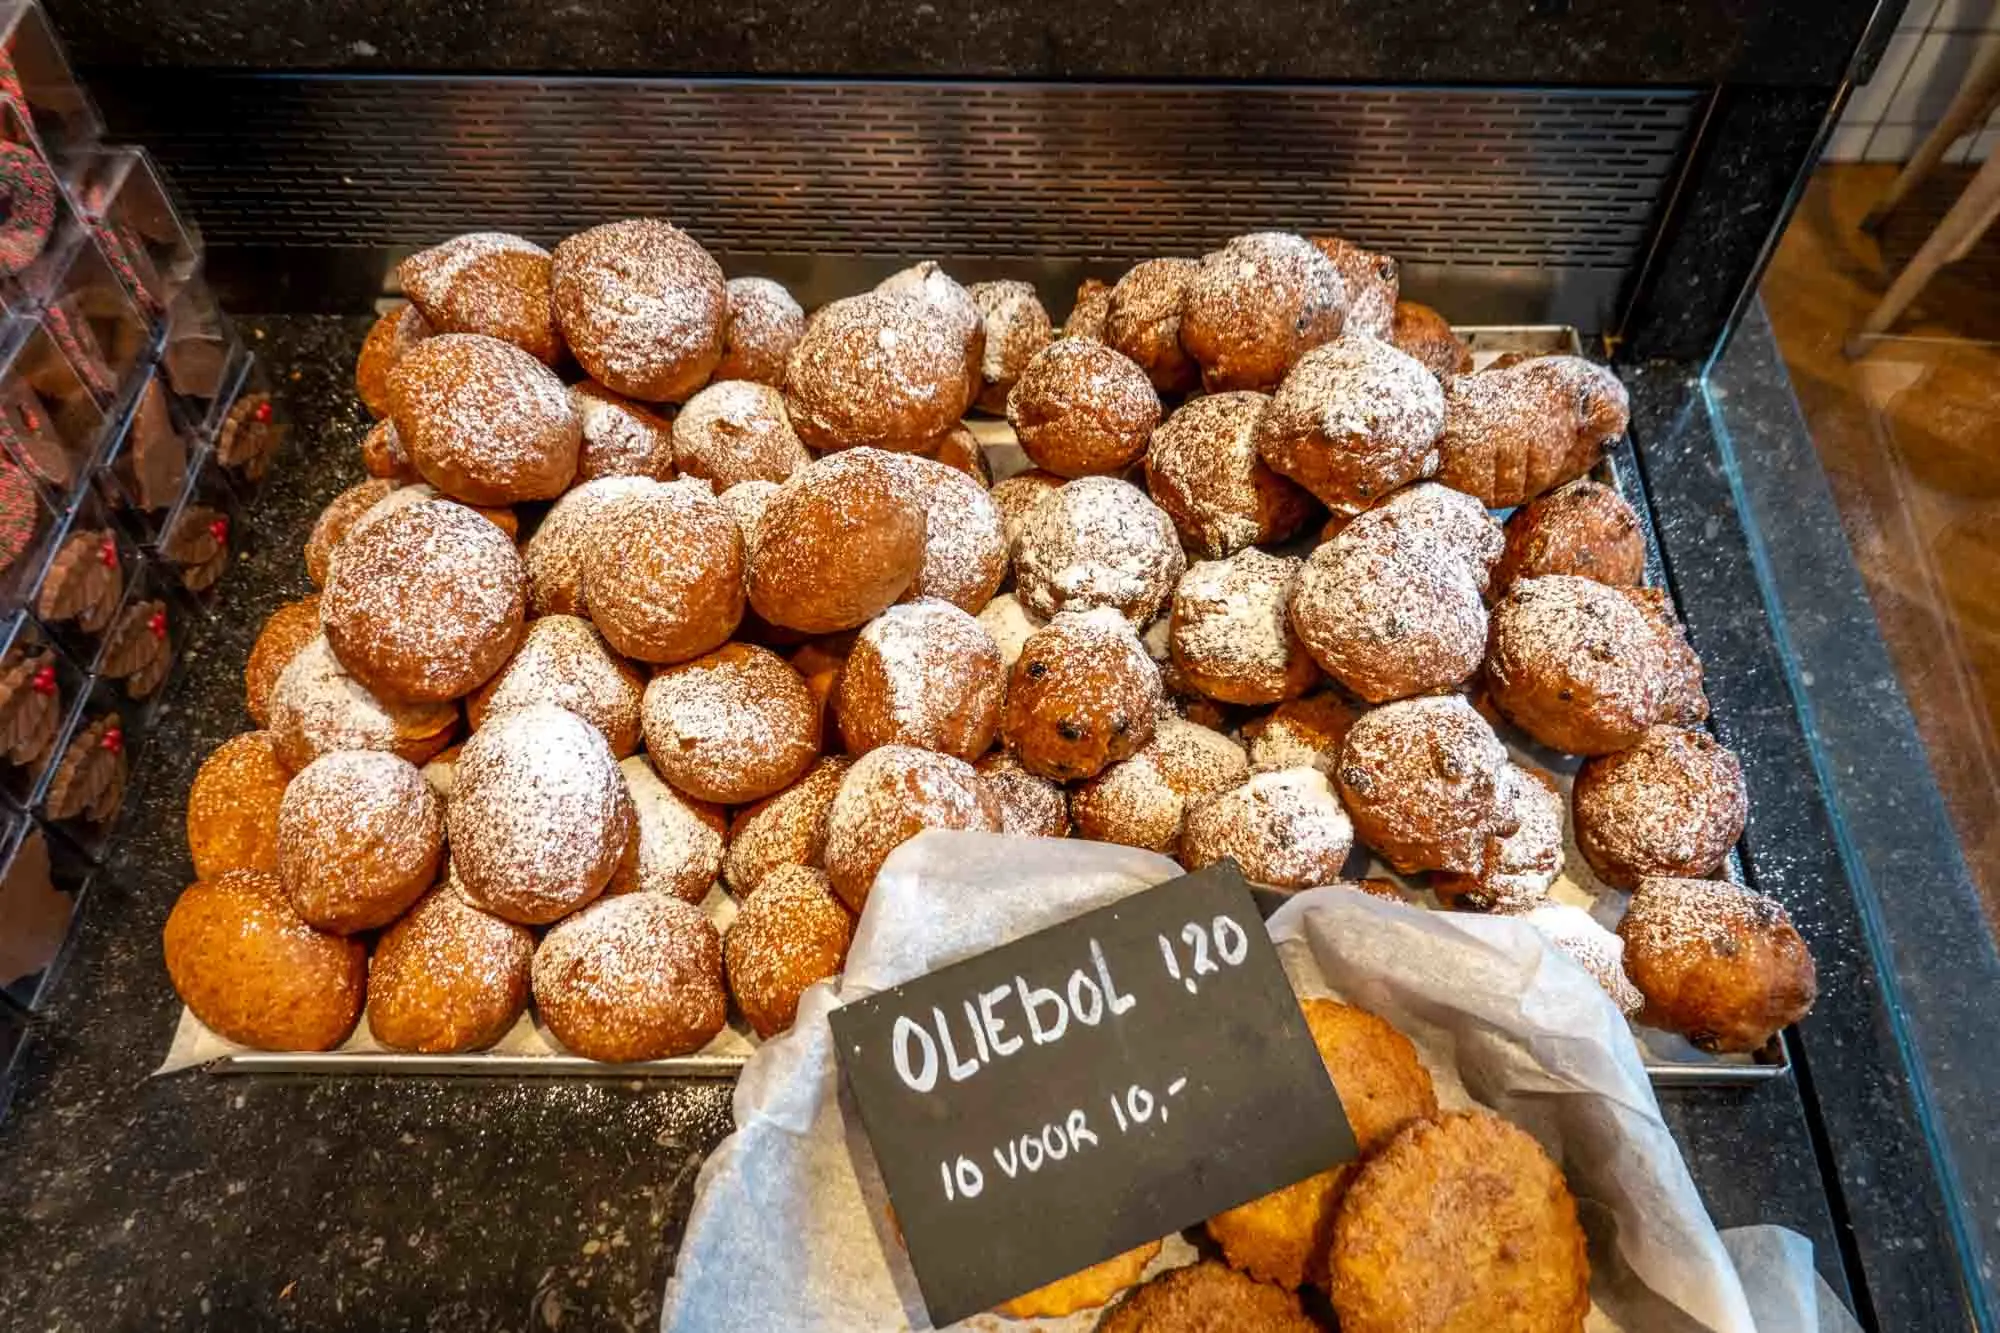 Oliballen (Dutch donuts) dusted with powdered sugar for sale.